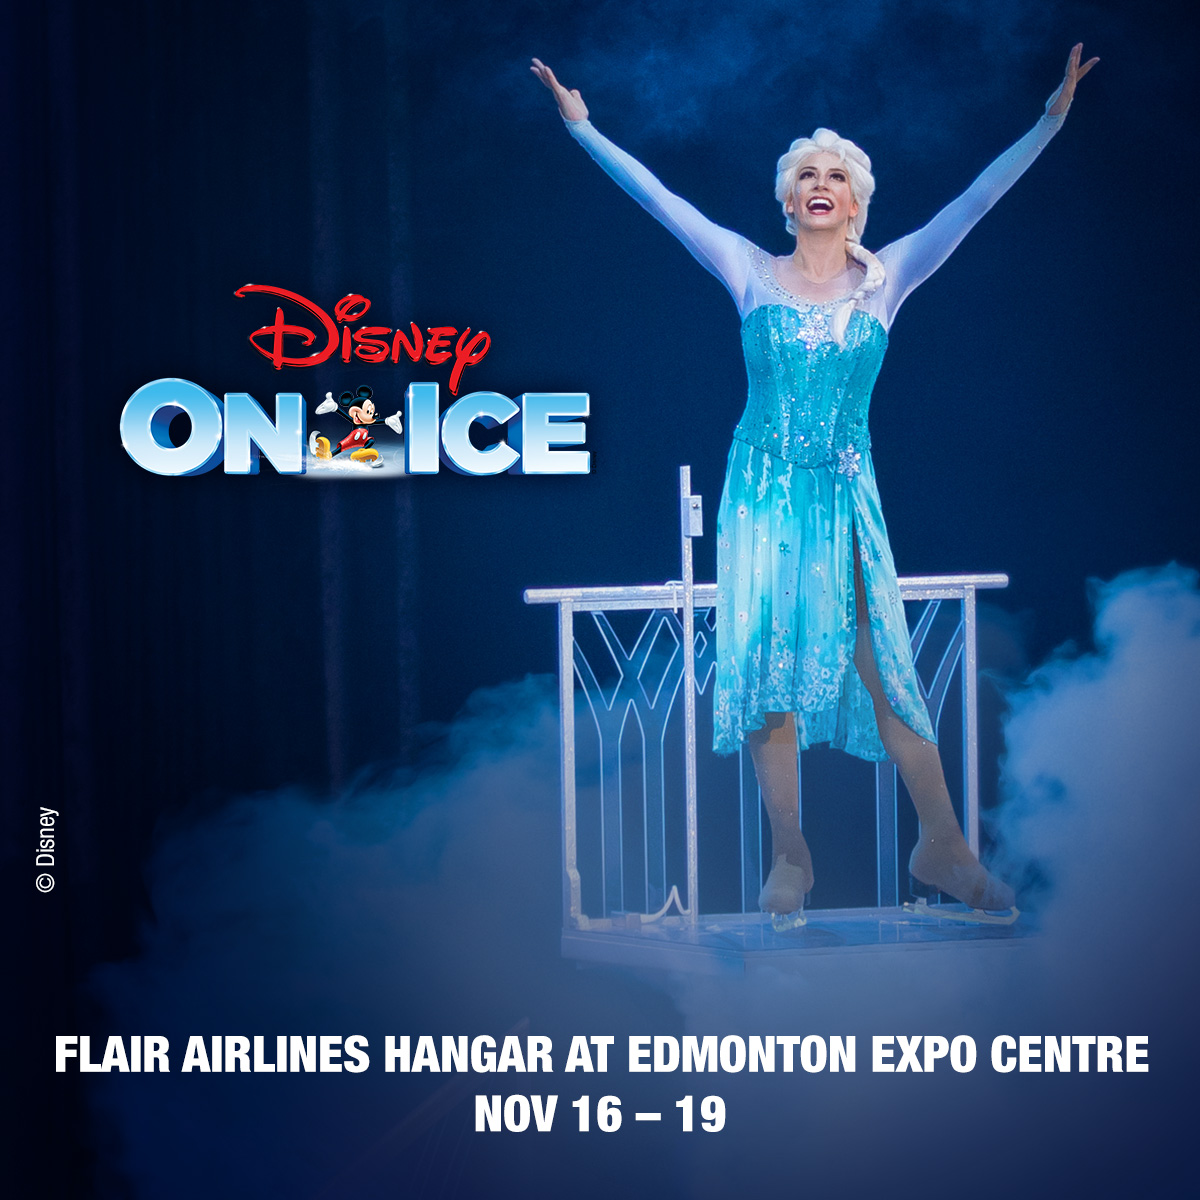 ⛸️ @DisneyOnIce presents Into the Magic is finally here, and you can get your tickets NOW! ⛸️ Join us from November 16 - 19 at The @FlairAirlines Hangar for an extravaganza that will leave you spellbound. 🎟️ Tickets are going fast, so don't wait - bit.ly/3sIrYY7!